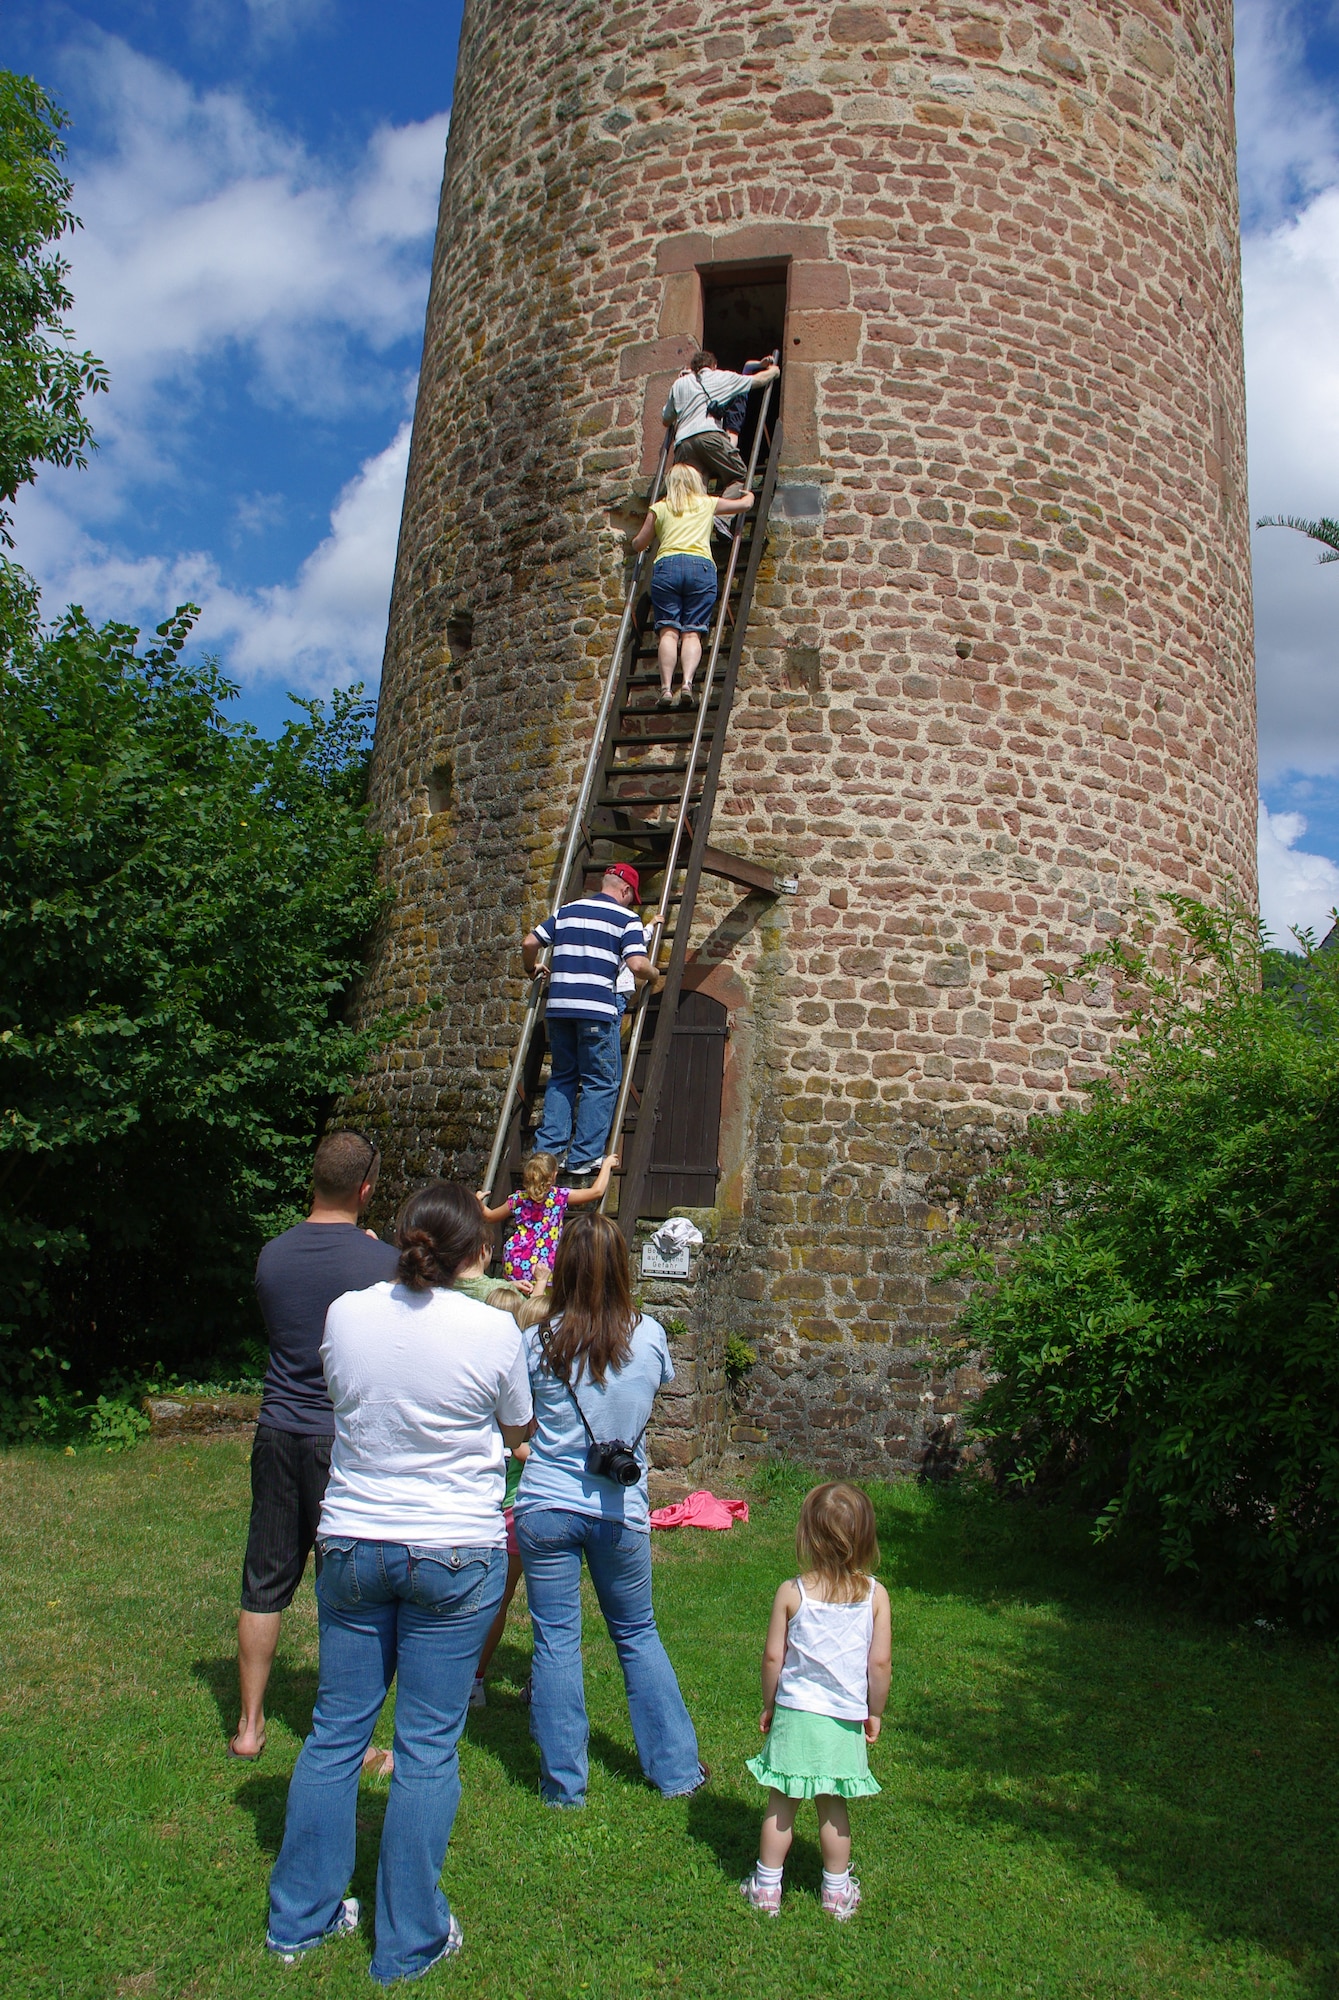 SPANGDAHLEM AIR BASE, Germany -- Spangdahlem base members and their families climb up a tower at the Bruch castle during an Explore the Eifel excursion.   Explore the Eifel events offer base members the opportunity to get out and learn more about local culture and history. (U.S. Air Force photo/Iris Reiff)